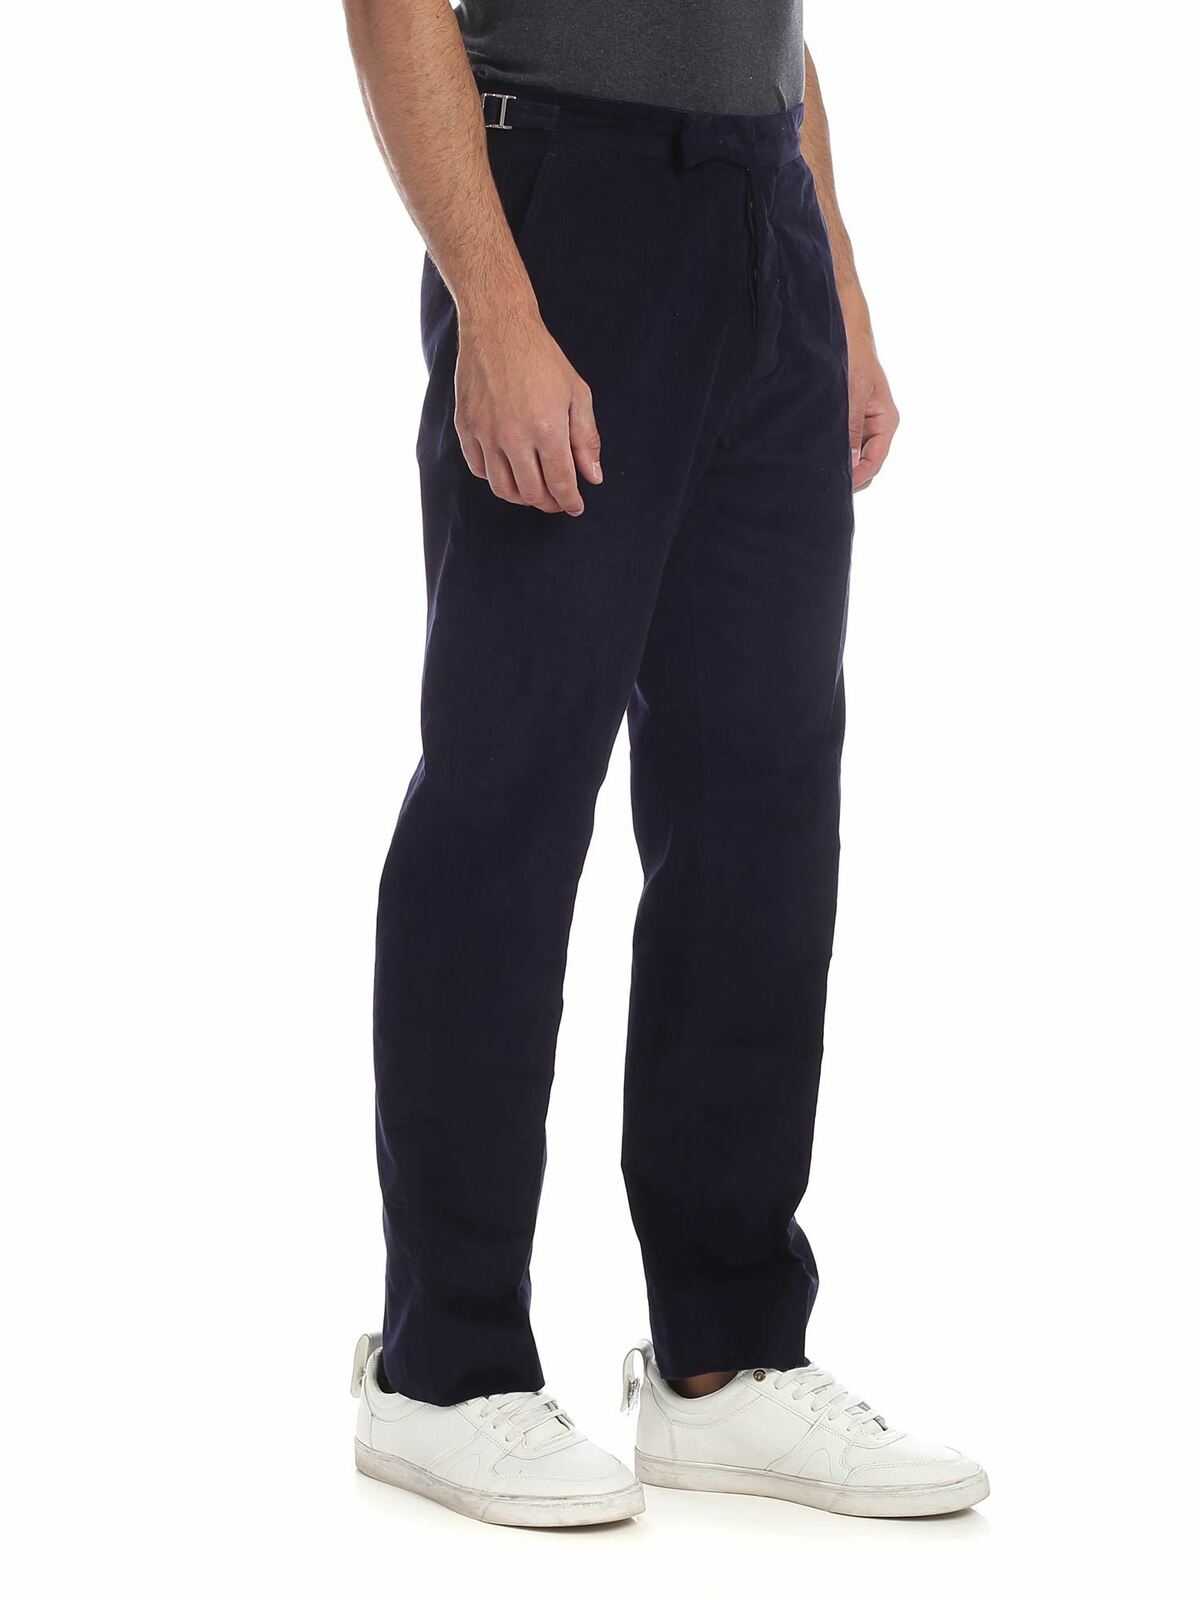 Corduroy tailored trousers - Women's Clothing Online Made in Italy